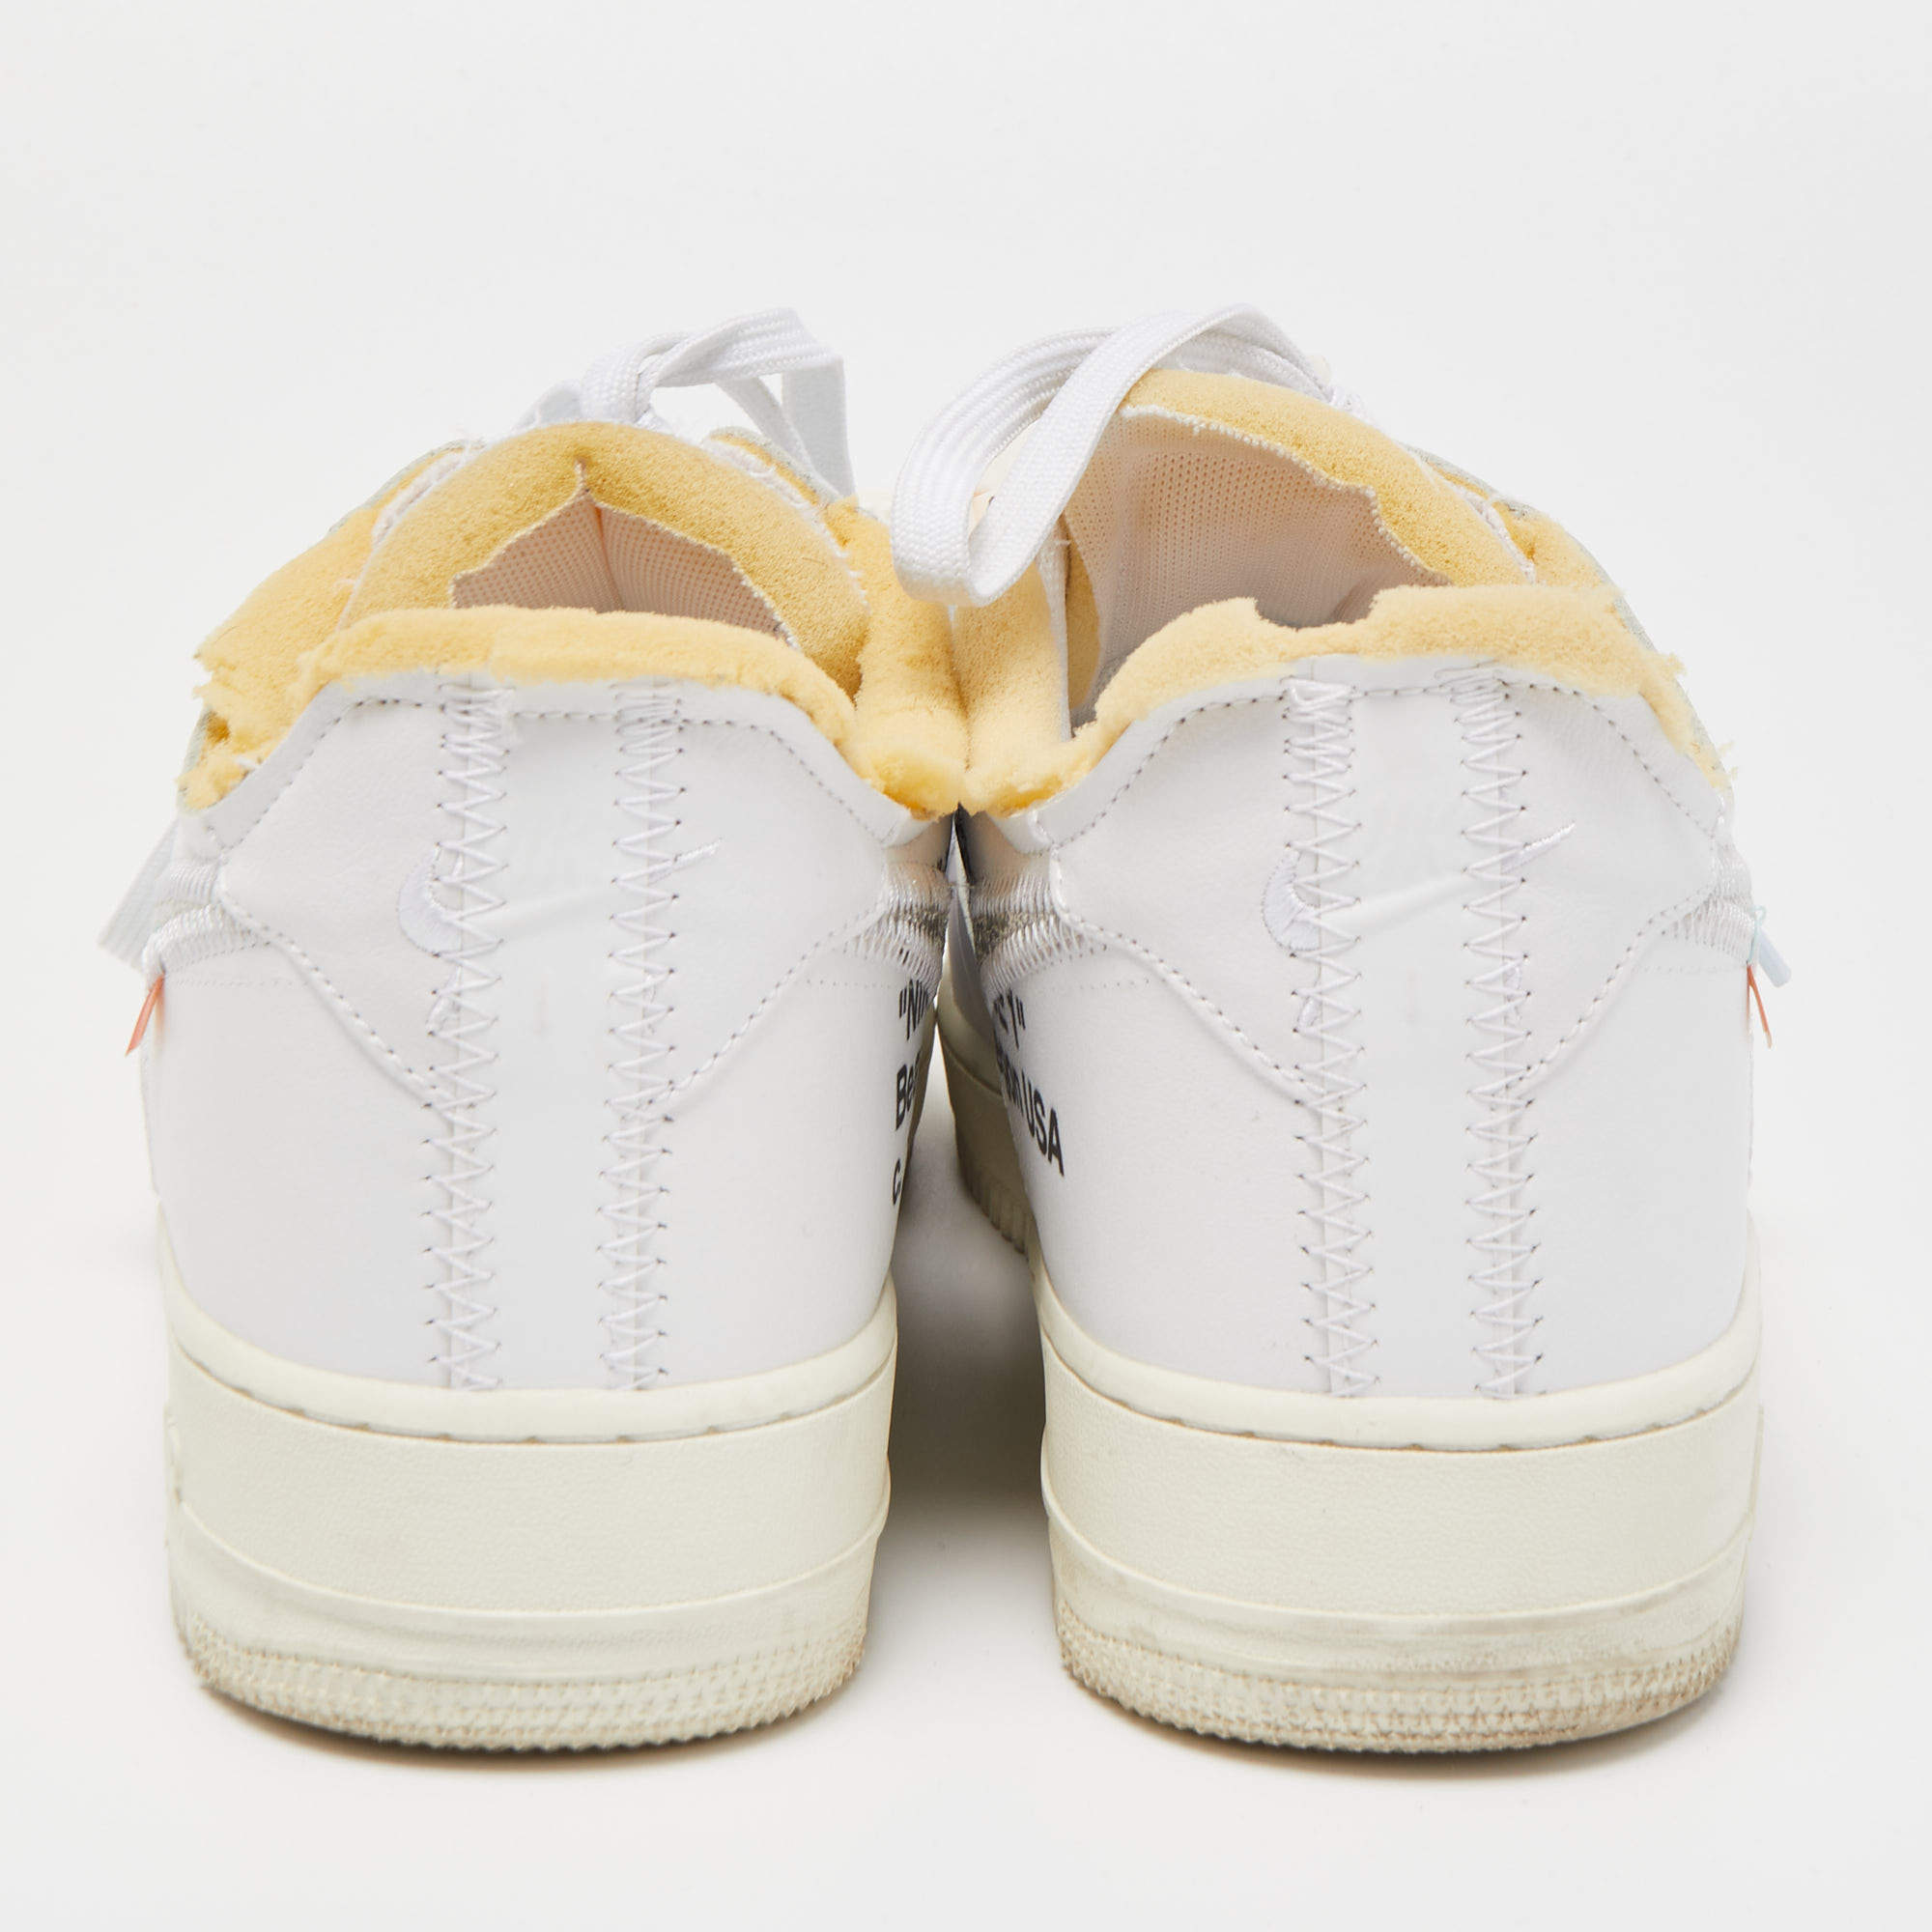 Nike White Leather Nike Air Force 1 Complexcon Sneakers Size 42.5